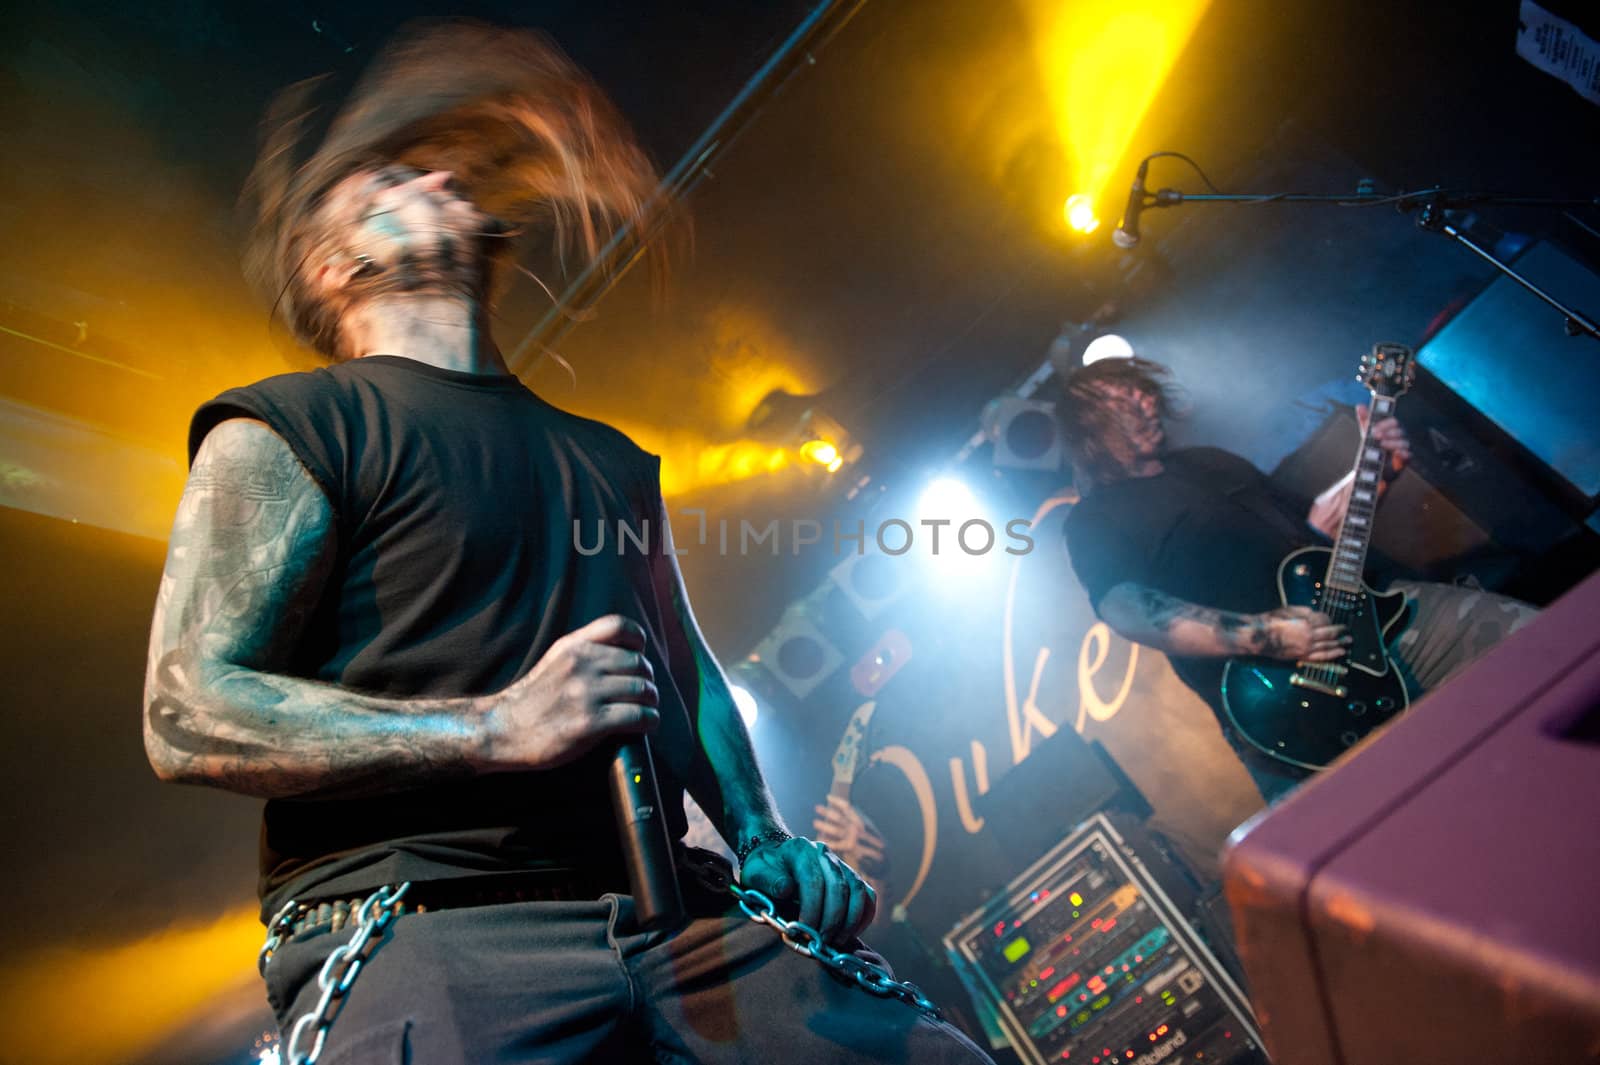 CANARY ISLANDS – DECEMBER 2: Kenneth Liliegren(l) and Songwriter Ole Olsen(r), from the Norwegian band Mecalimb, performing onstage during Hard & Heavy Meeting December 2, 2011 in Canary islands,Spain
